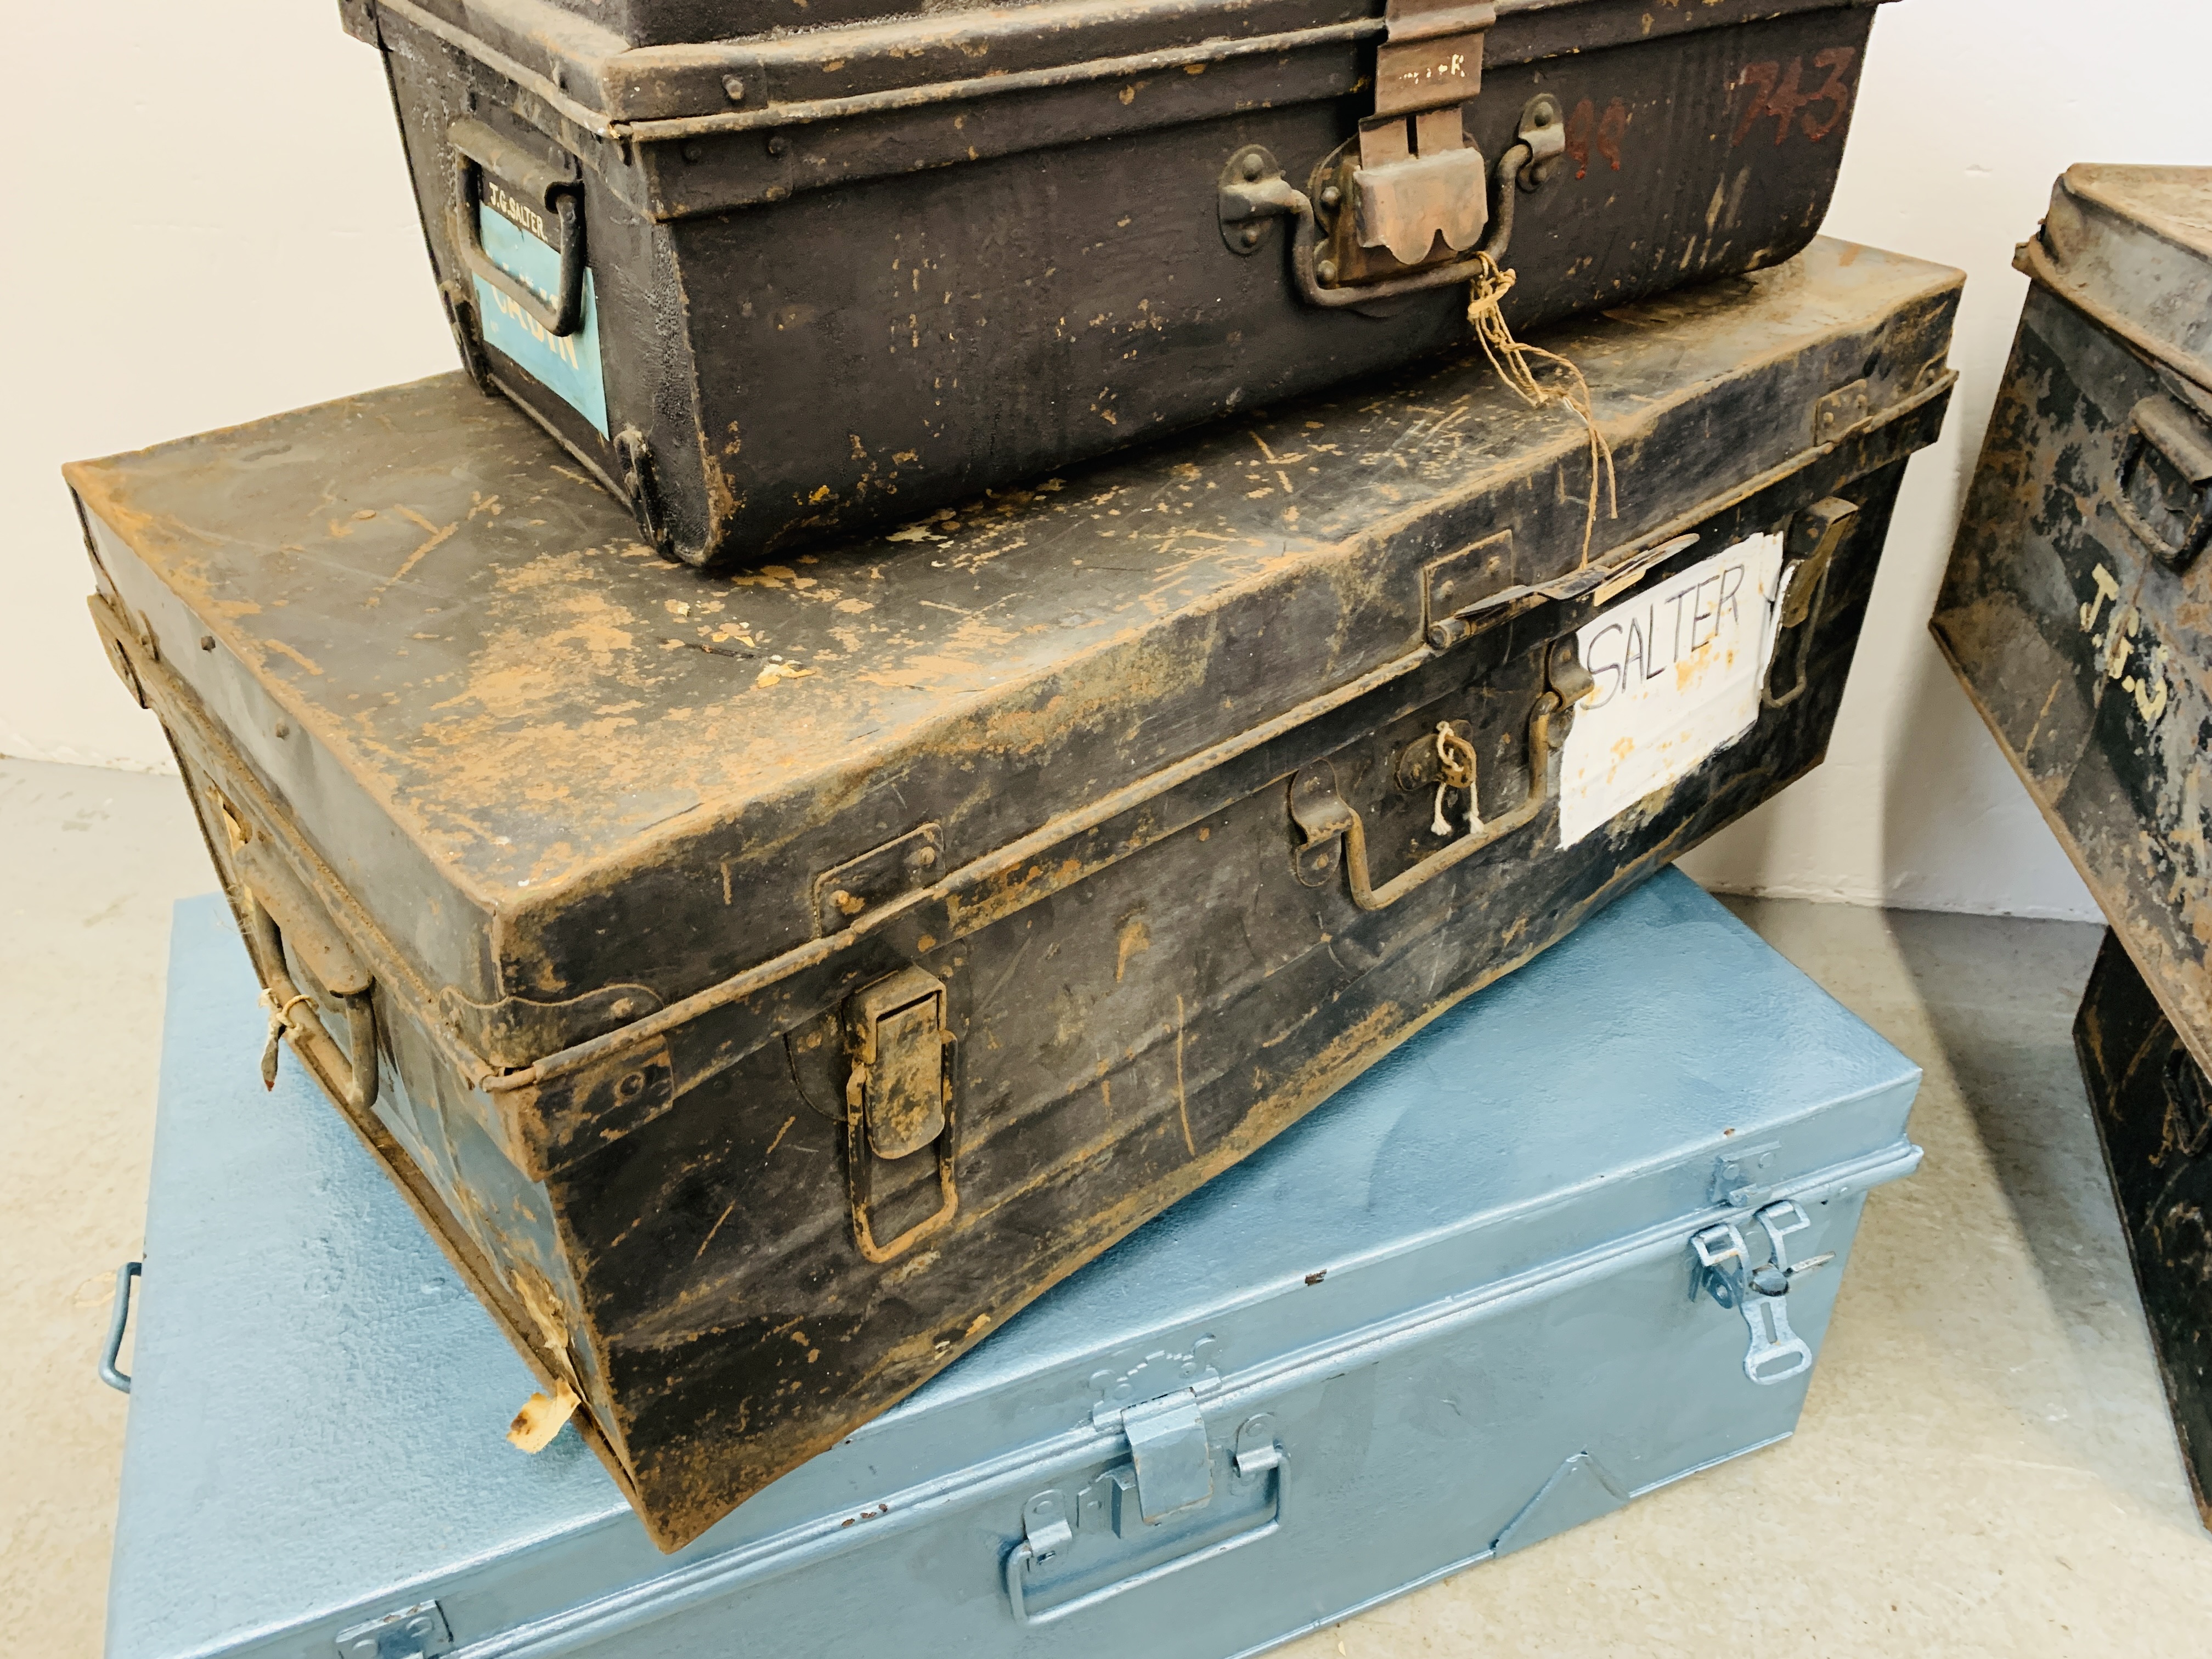 COLLECTION OF 5 VINTAGE METAL TRAVELLING TRUNKS - Image 6 of 7